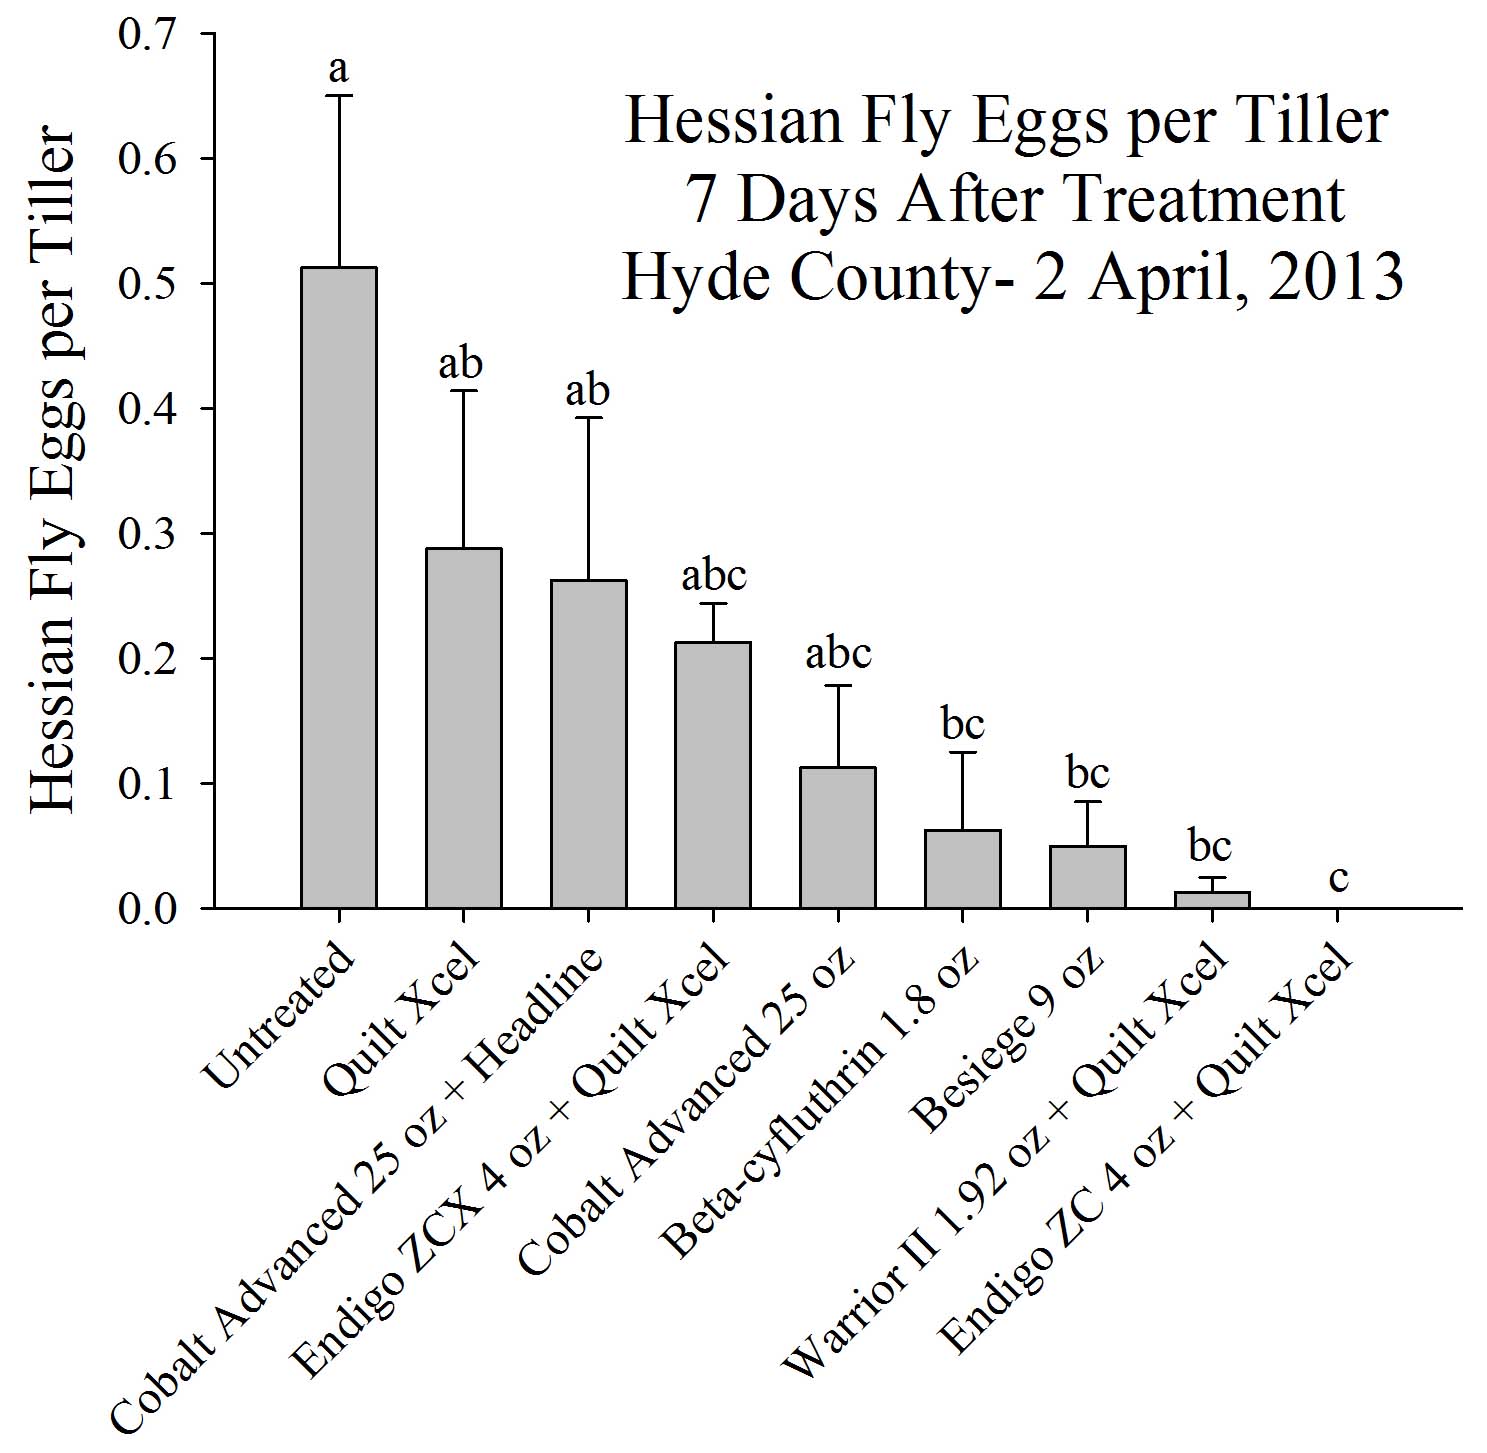 Efficacy graph for various insecticides. Bar graph shows effect of insecticides on Hessian fly eggs